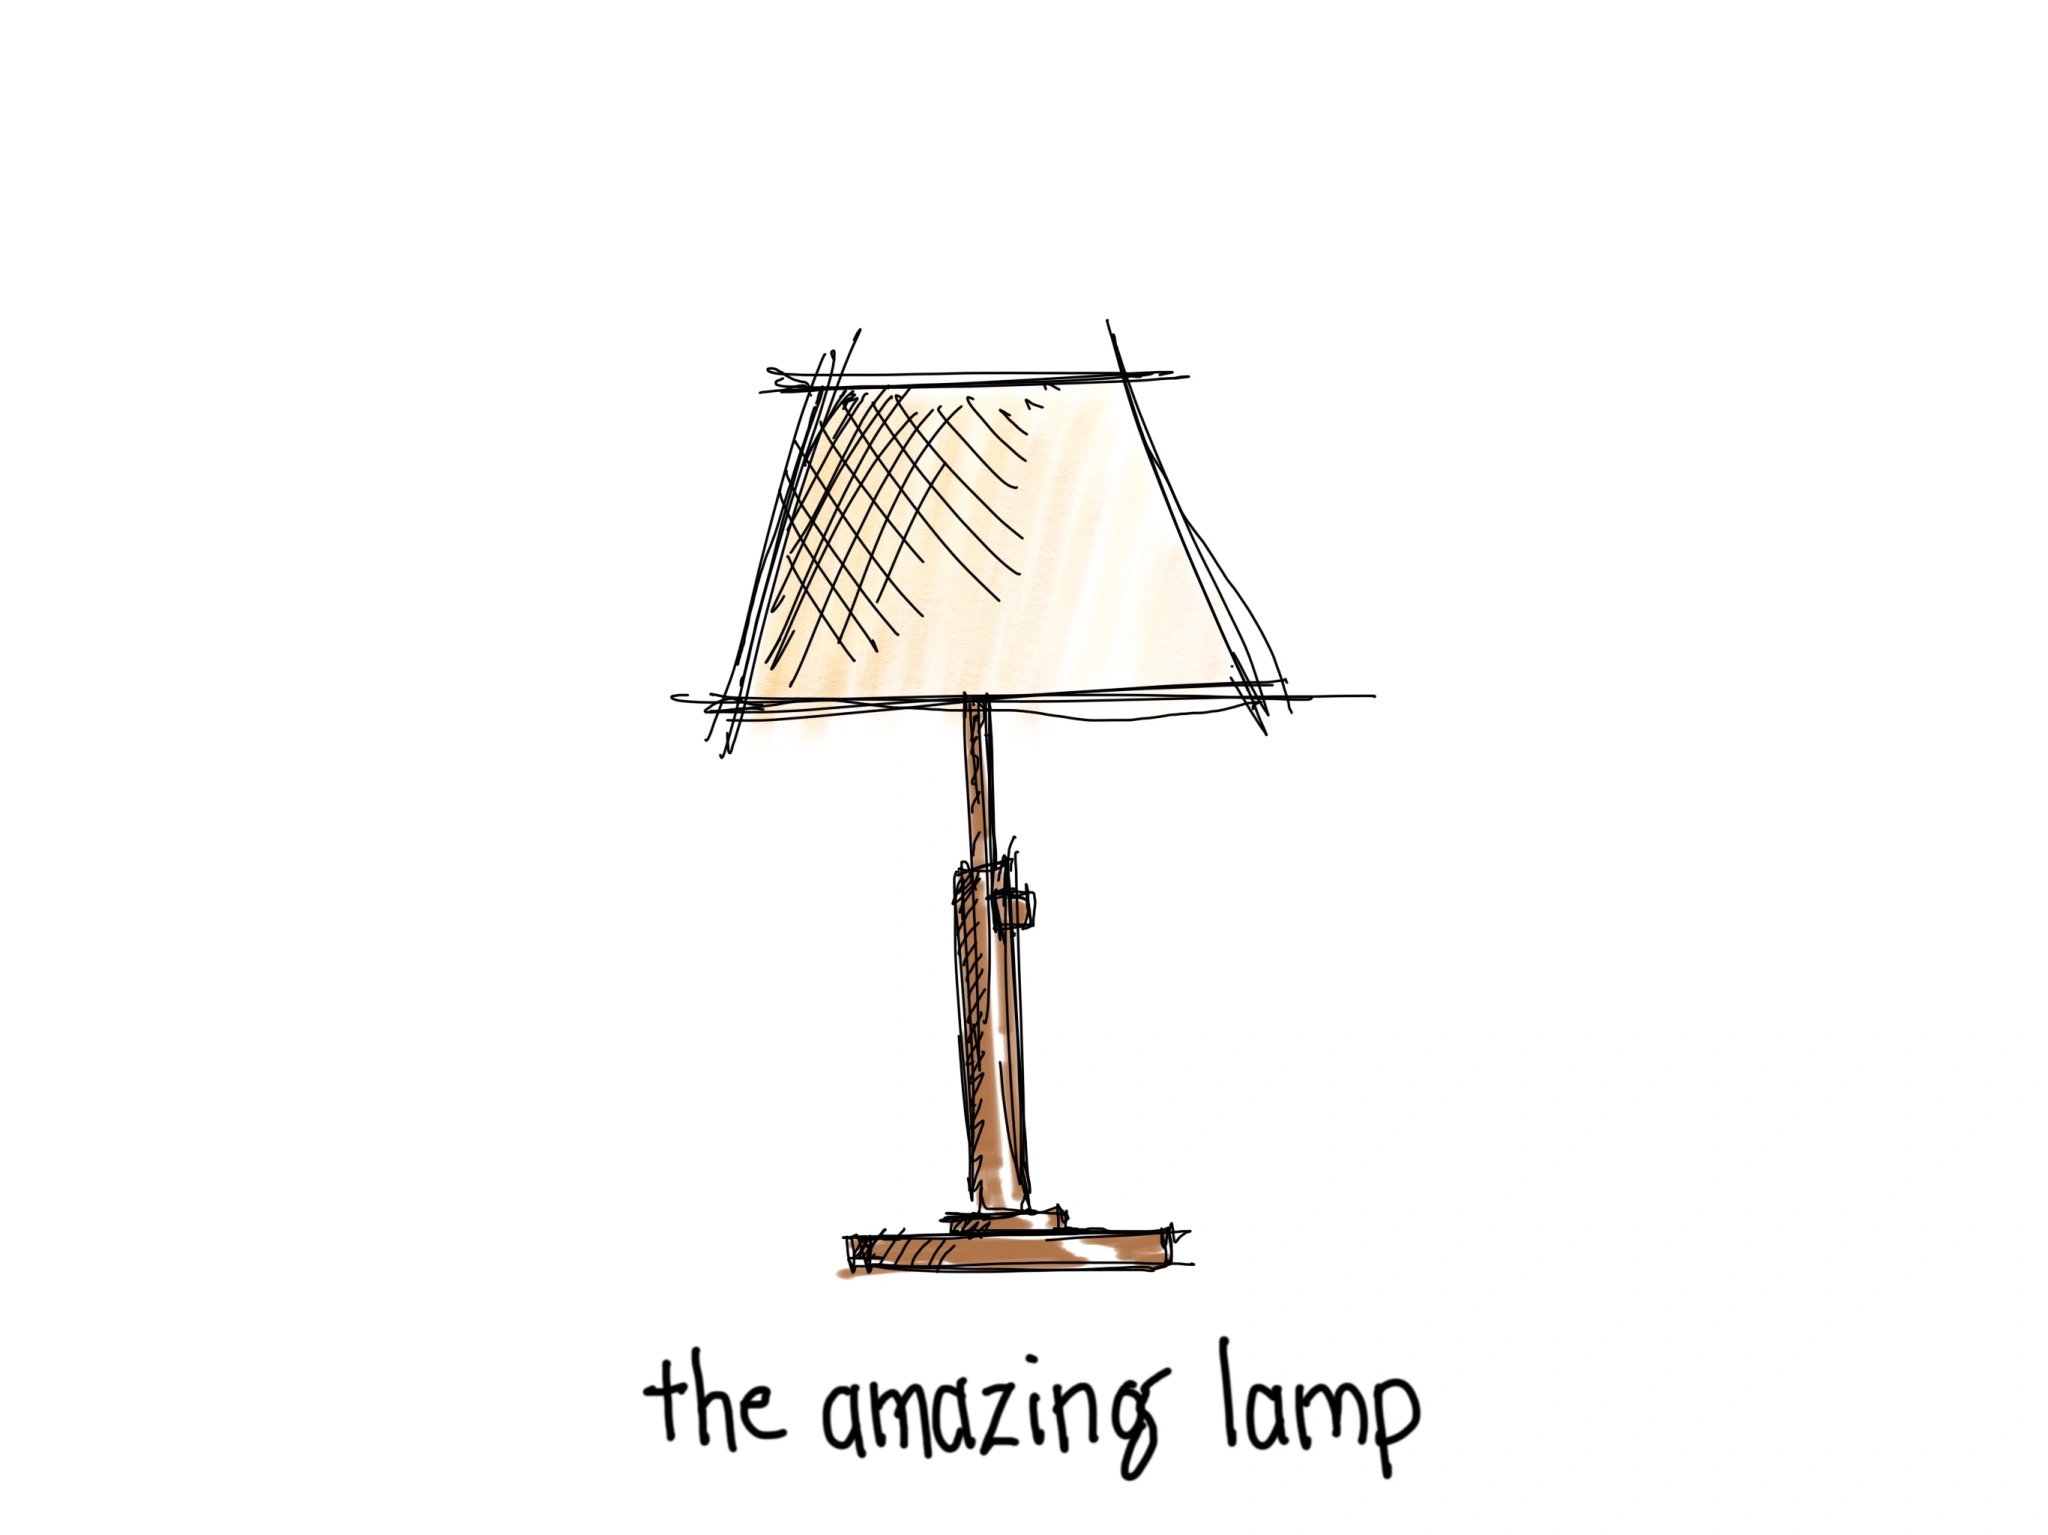 An illustration of a standard lamp with a thin stem and a lampshade. Text underneath reads "the amazing lamp"